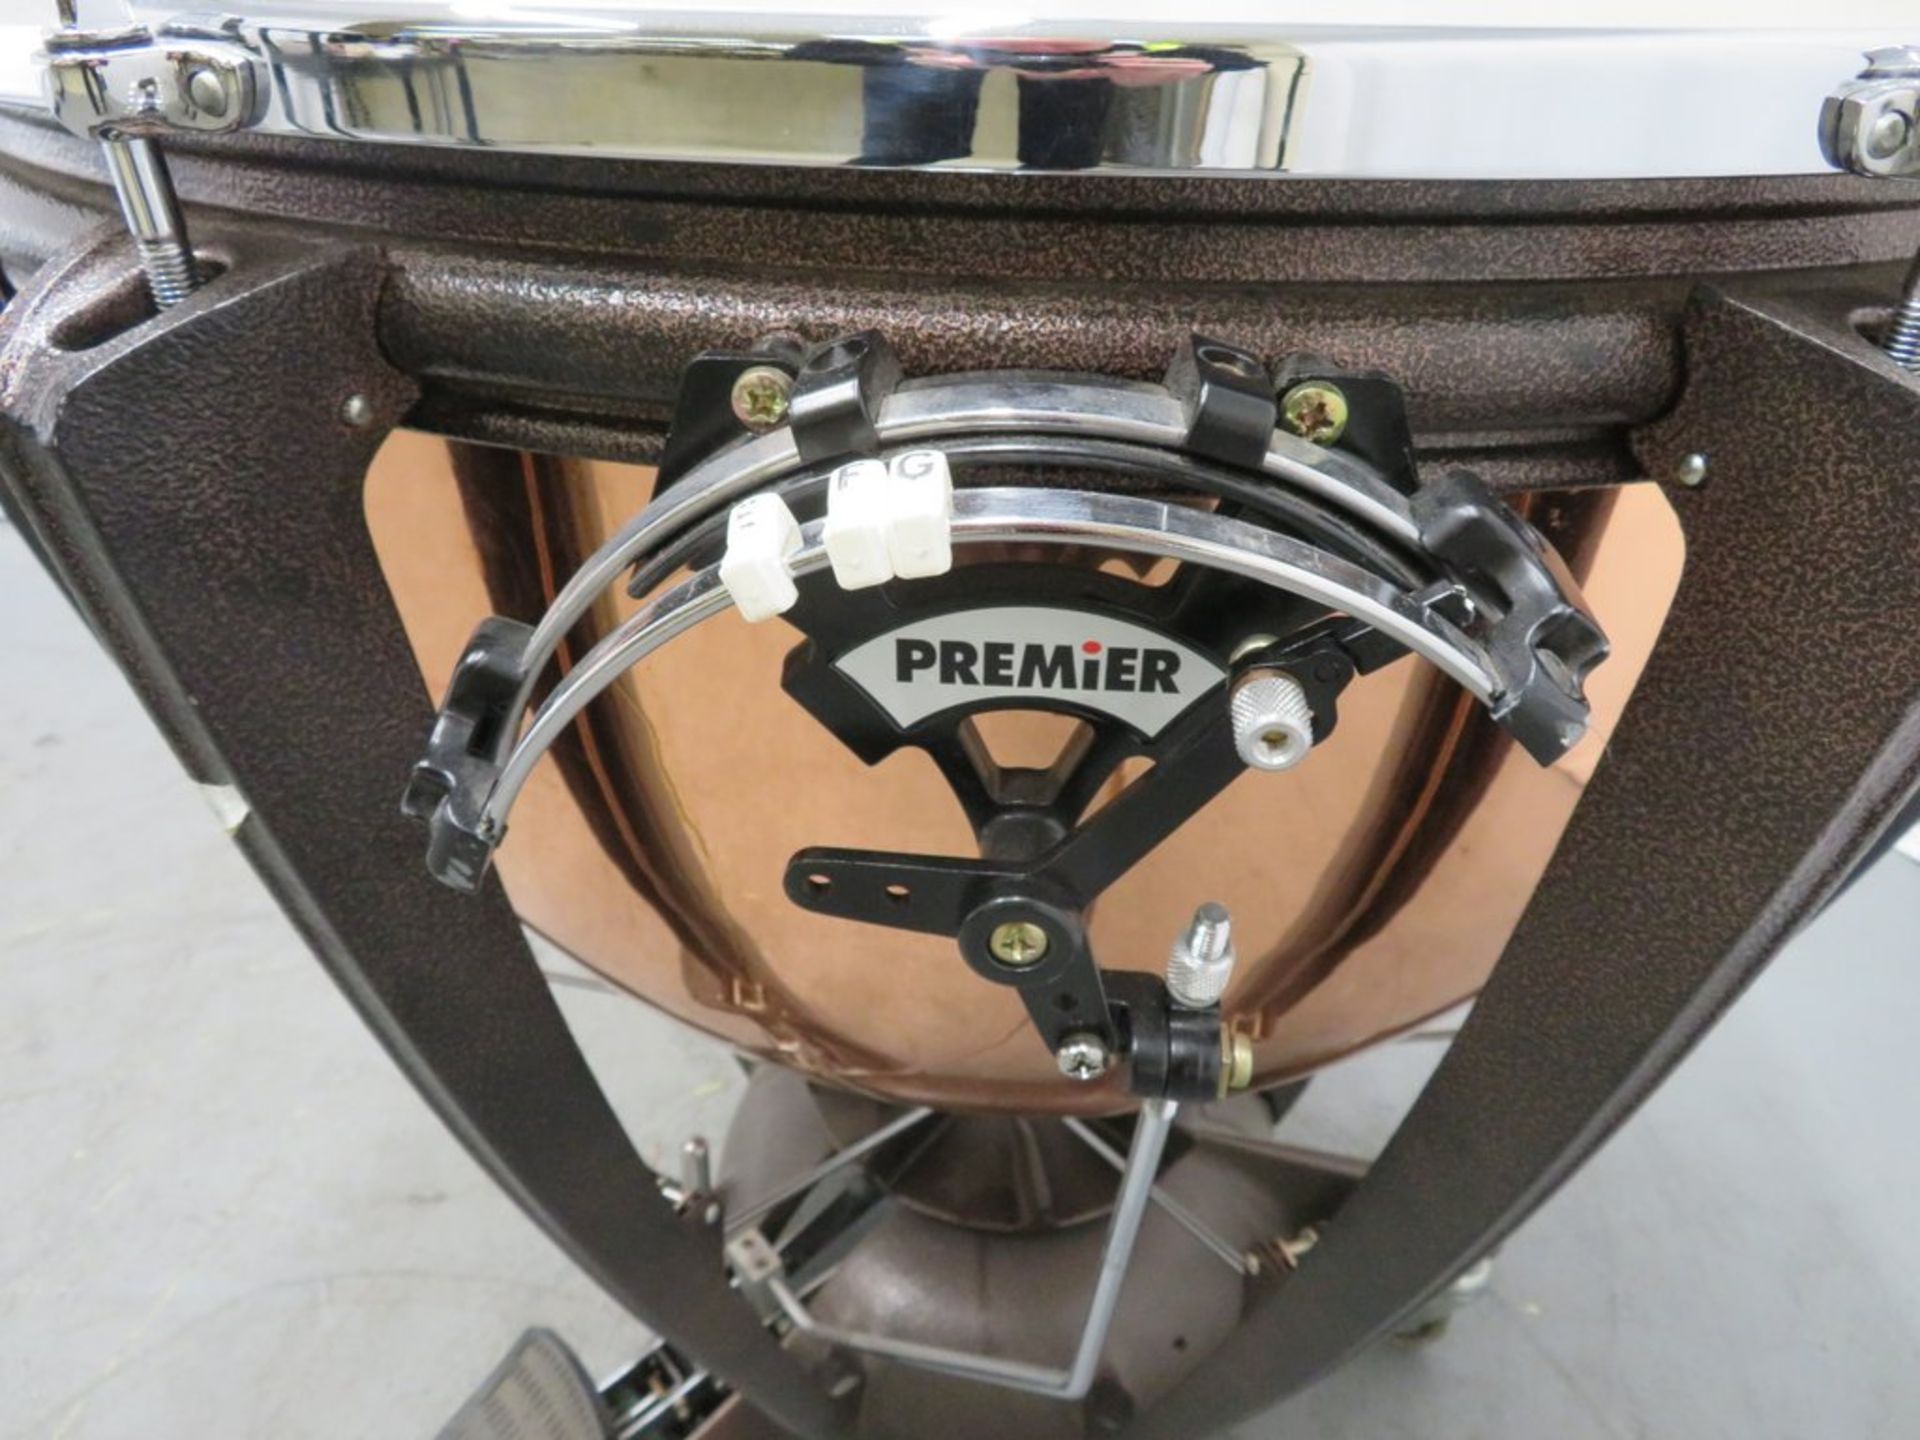 Premier 32"" Kettle Drum Complete With Padded Cover. - Image 4 of 6